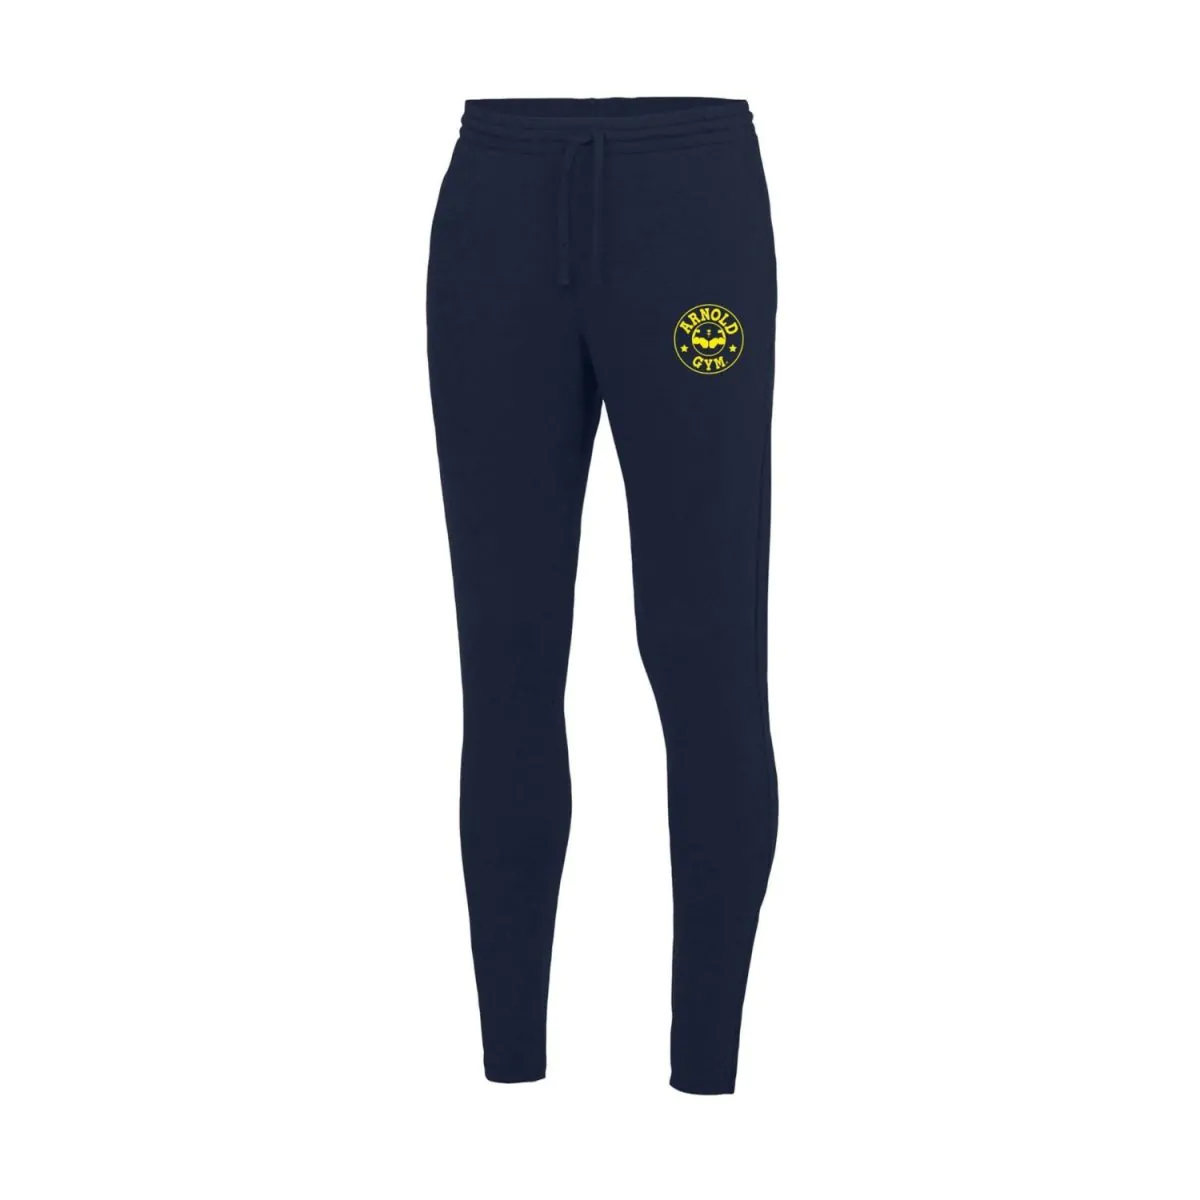 0000430 mens fitness athletic jogger navy pants